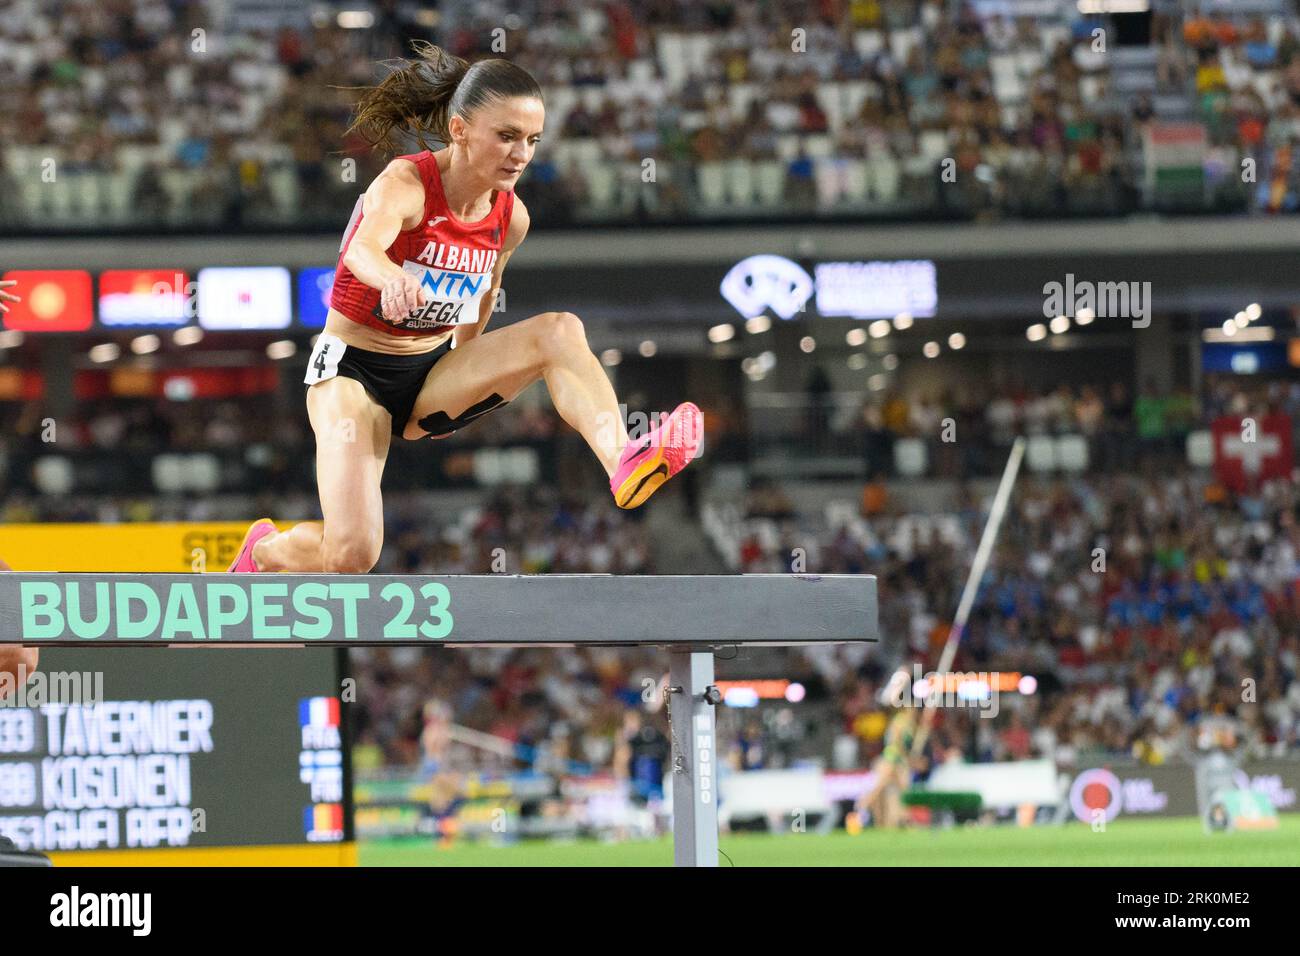 Budapest, Hungary. 23rd Aug, 2023. Luiza Gega (Albania) during the 3000 metres steeplechase heats during the world athletics championships 2023 at the National Athletics Centre, in Budapest, Hungary. (Sven Beyrich/SPP) Credit: SPP Sport Press Photo. /Alamy Live News Credit: SPP Sport Press Photo. /Alamy Live News Stock Photo